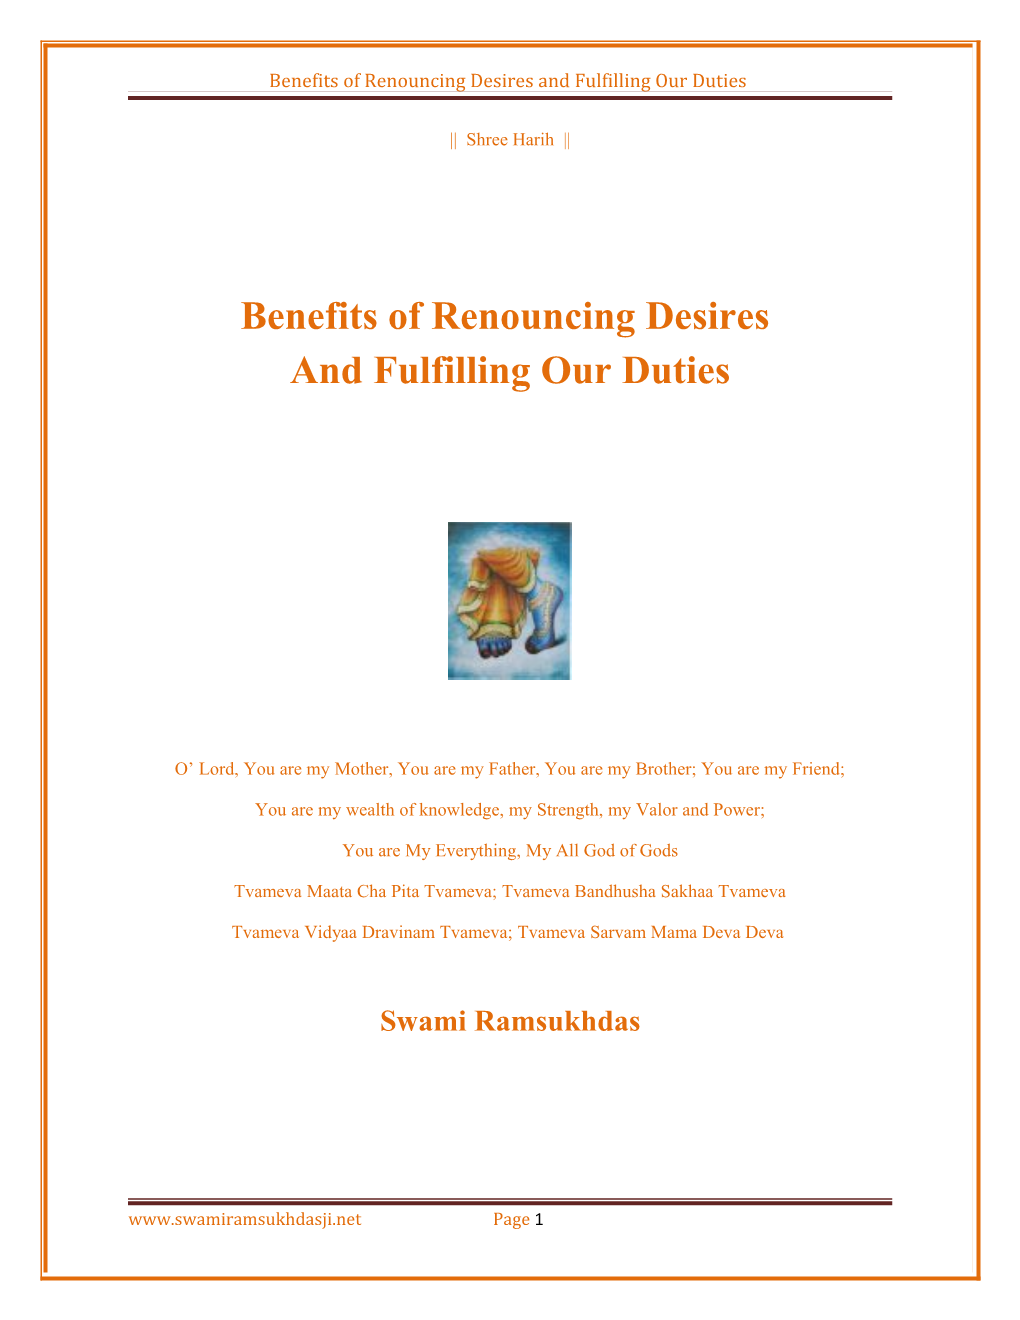 Benefits of Renouncing Desires and Fulfilling Our Duties